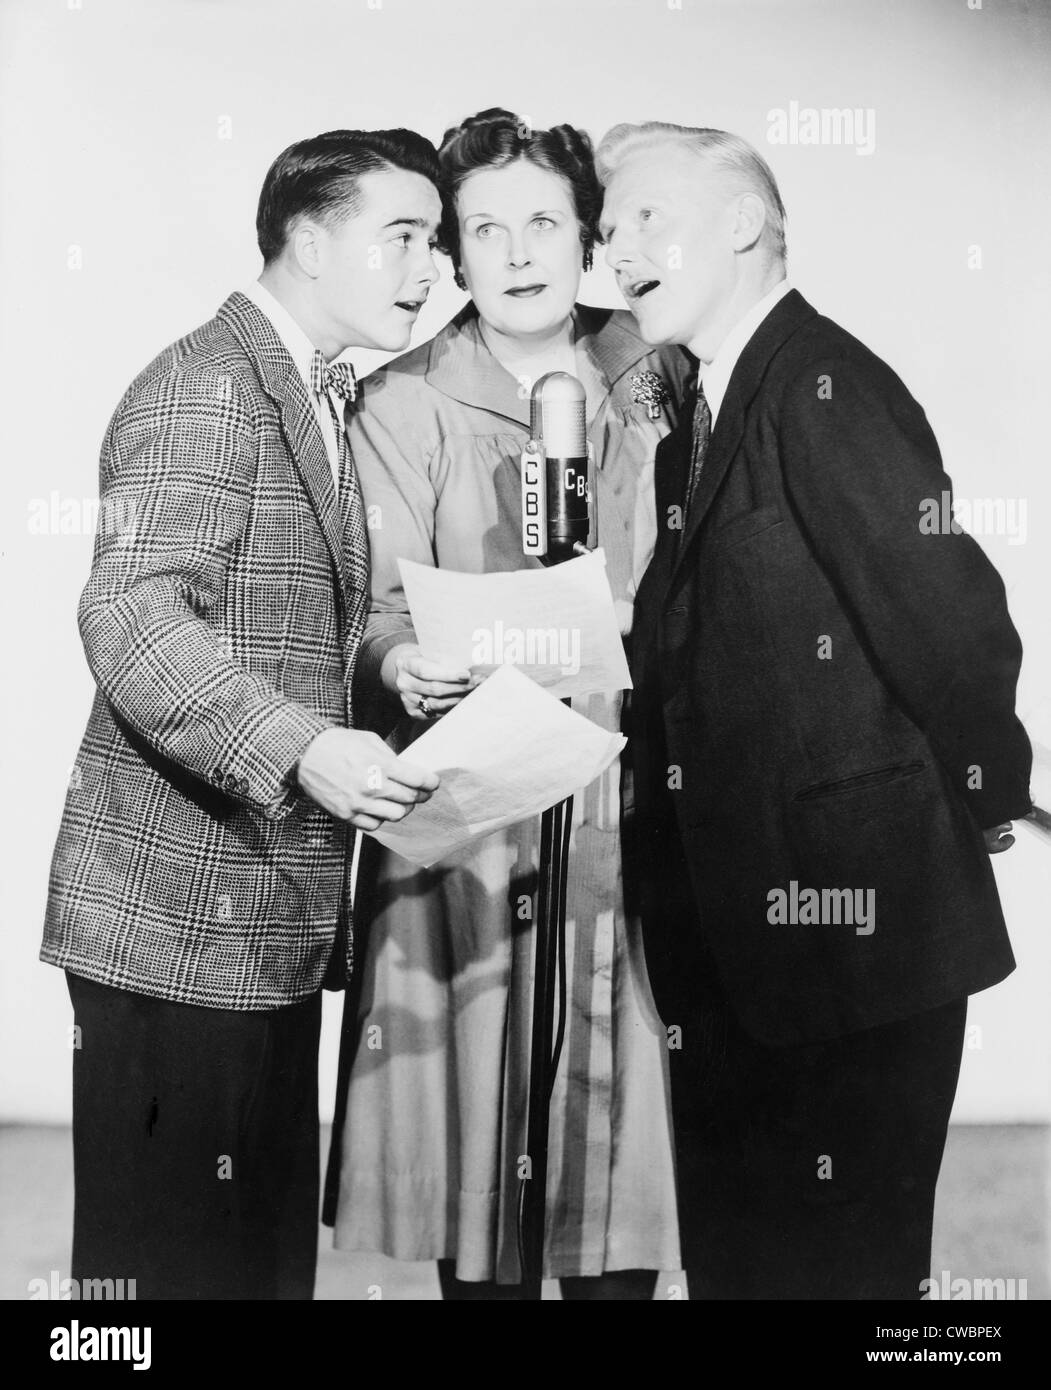 Dickie Jones (b.1927) at left, and other voice actors on the C.B.S. radio show THE ALDRITCH FAMILY (1938-1953), a popular radio Stock Photo